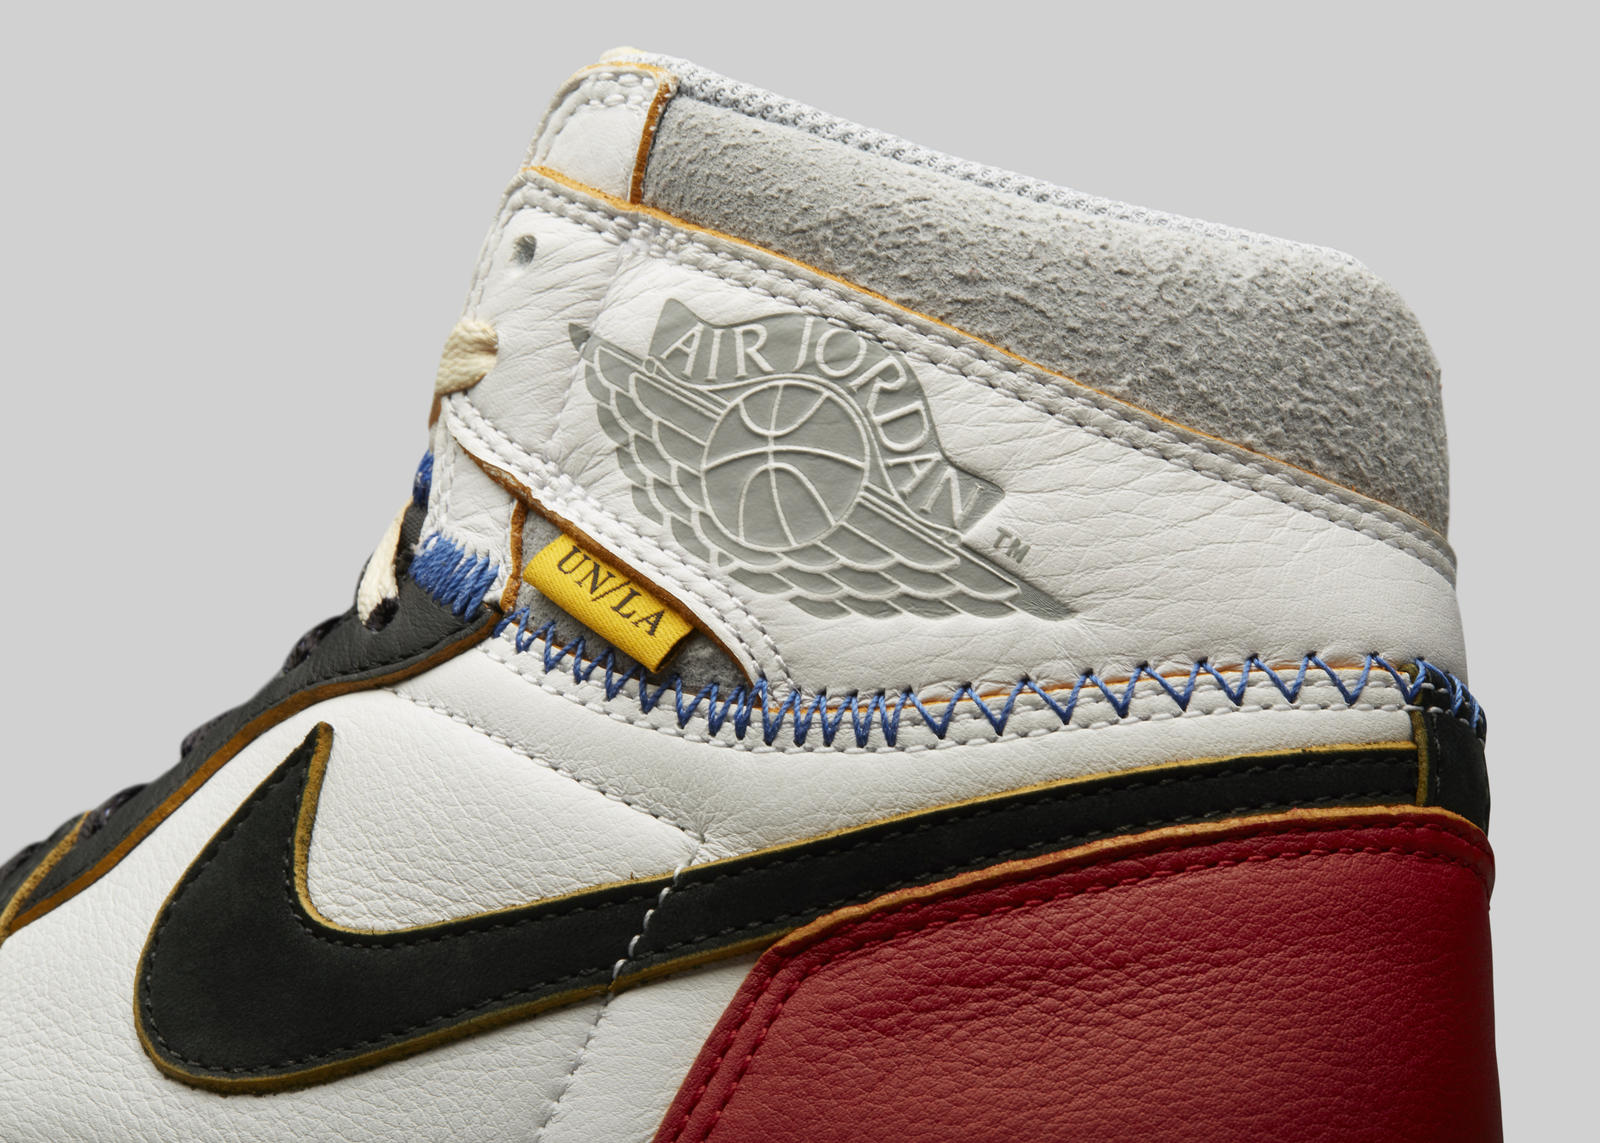 New Union LA x Air Jordan 1 High OG Rumored To Be Dropping